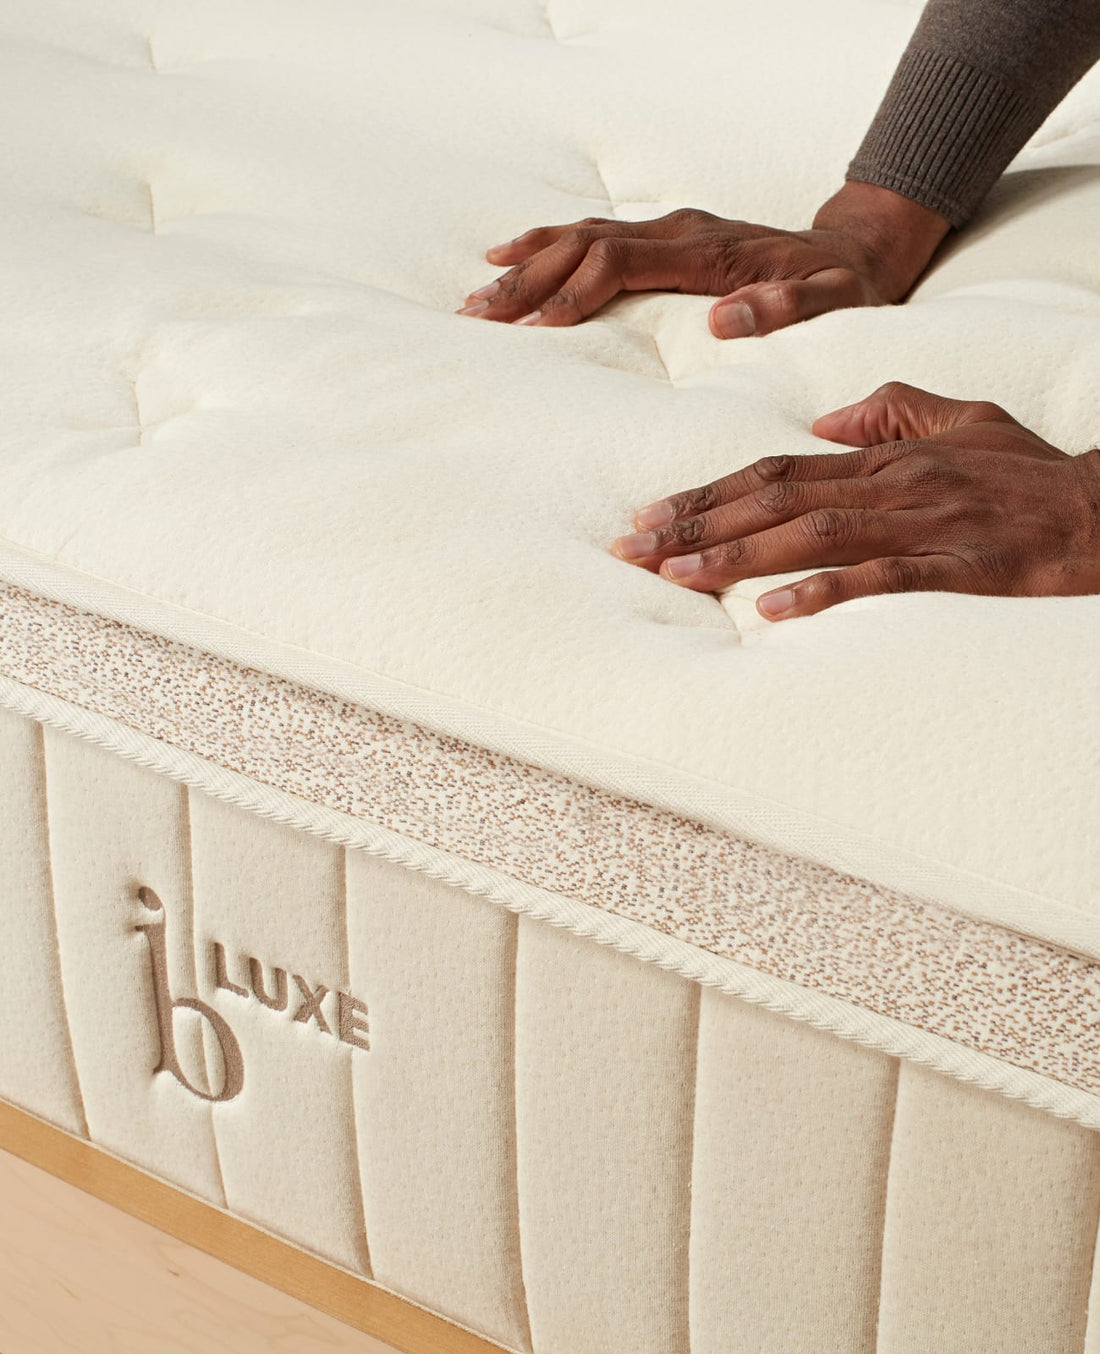 Latex Vs Hybrid Mattresses - Which Mattress Type Is Best For You?